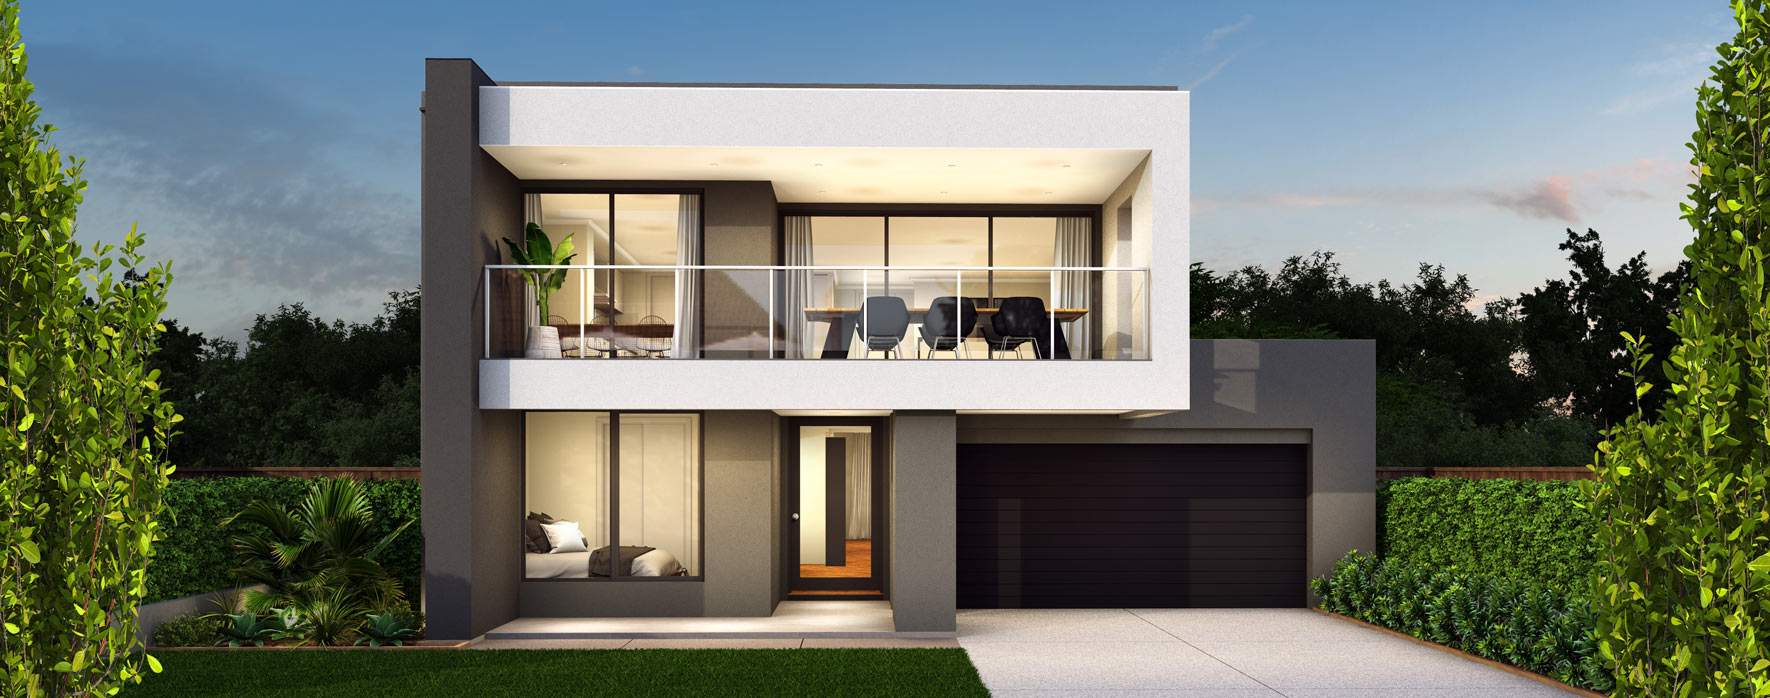 Seabreeze Double Storey House Design With 4 Bedrooms Mojo Homes